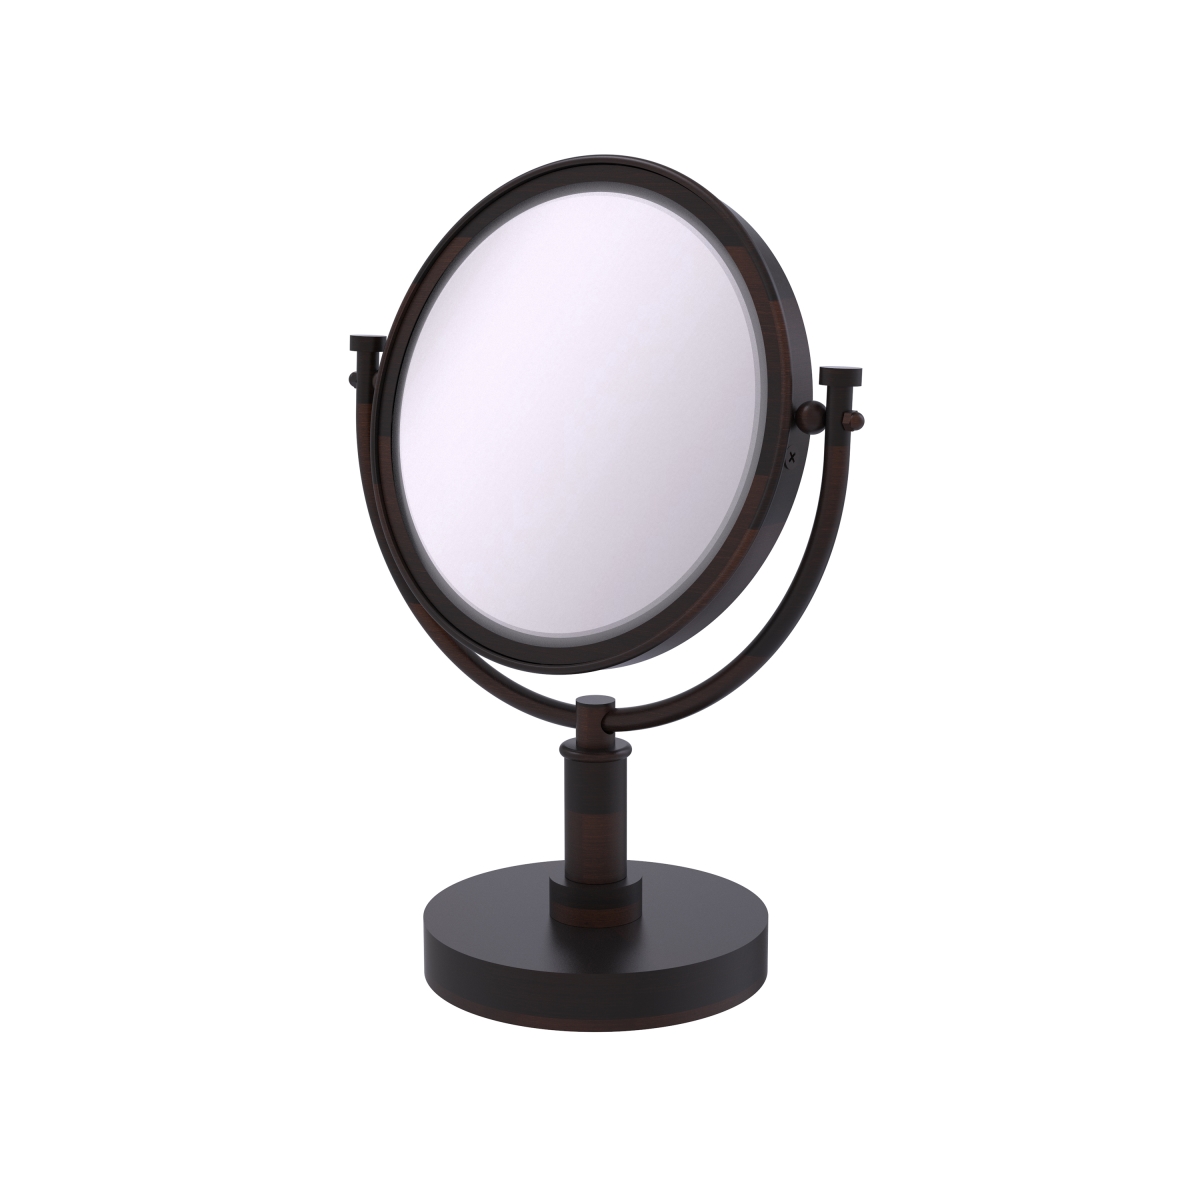 Picture of Allied Brass DM-4-4X-VB 8 in. Vanity Top Make-Up Mirror 4X Magnification, Venetian Bronze - 15 x 8 x 8 in.